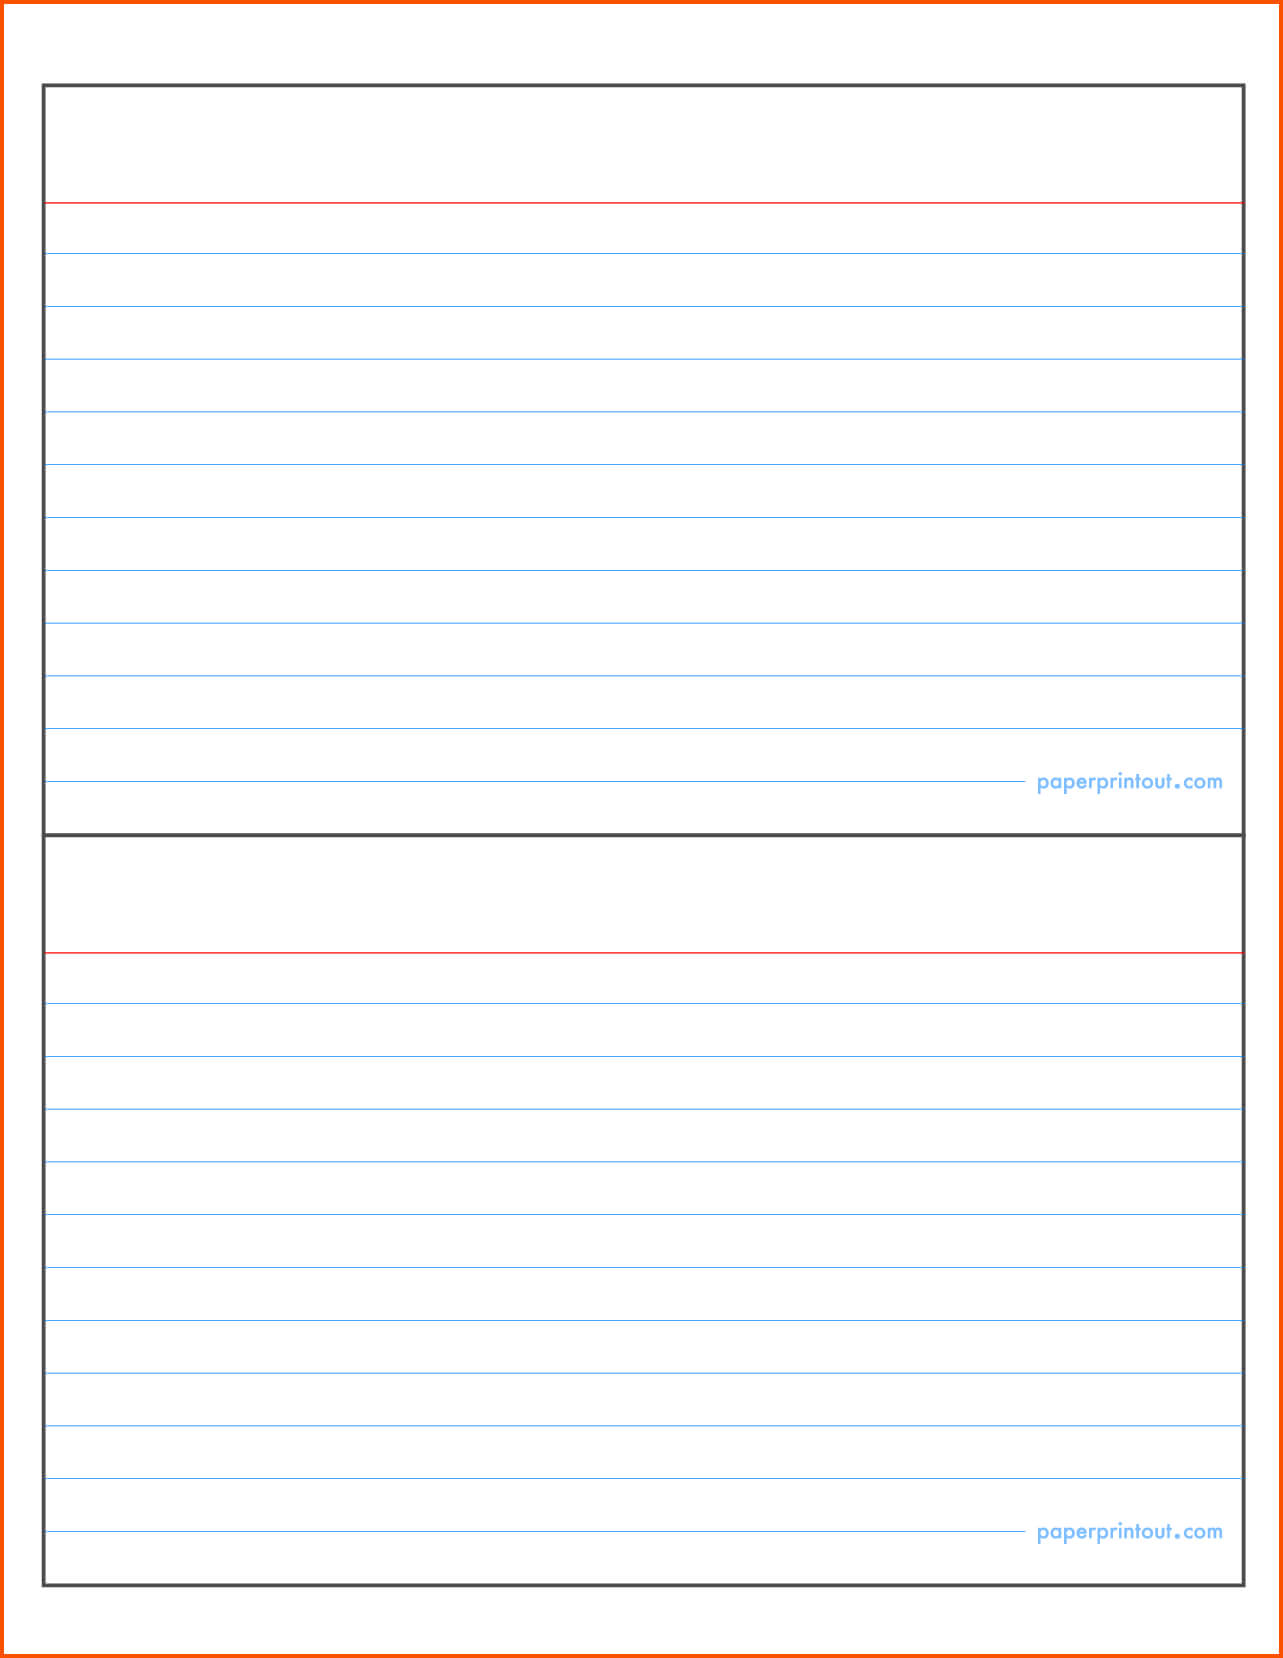 010 Free Index Card Template Word For Success Resume 3X5 With 3X5 Blank Index Card Template